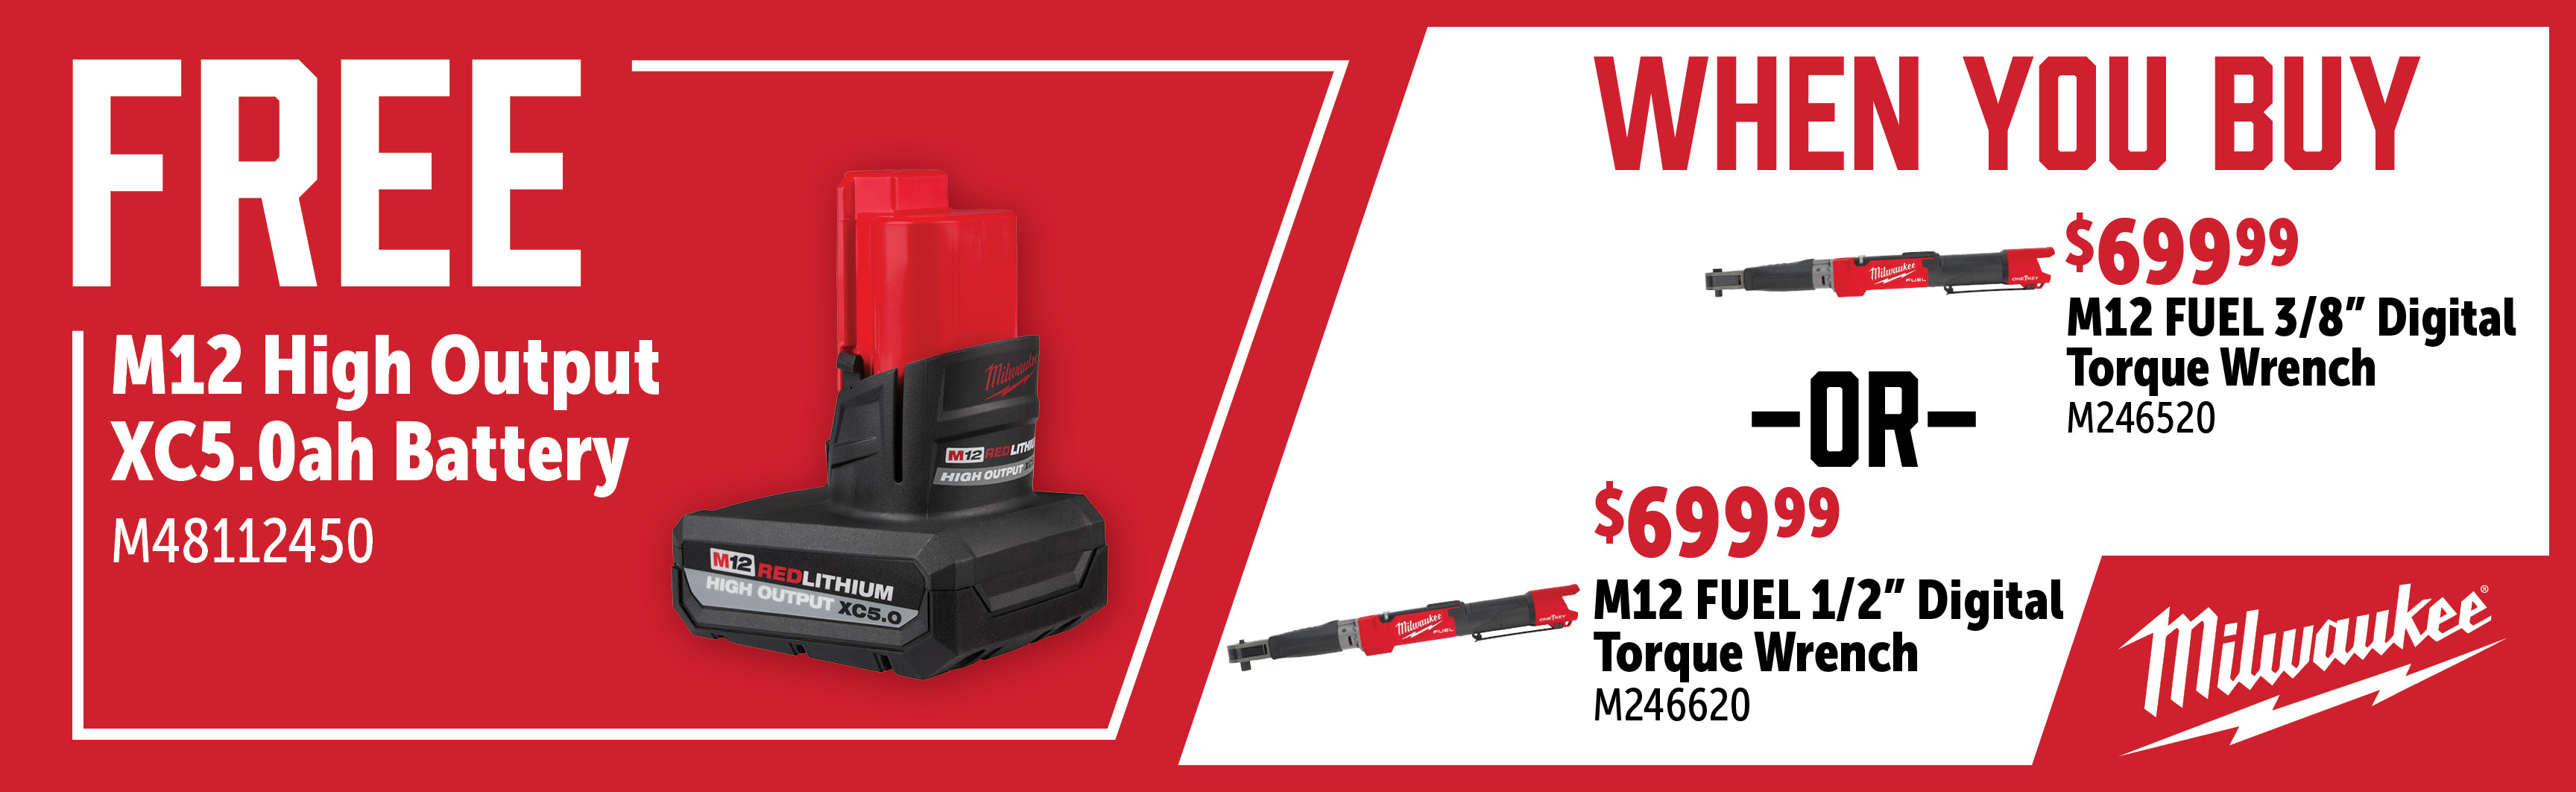 Milwaukee Feb-Apr: Buy an M246520 or M246620 and Get a FREE M48112450